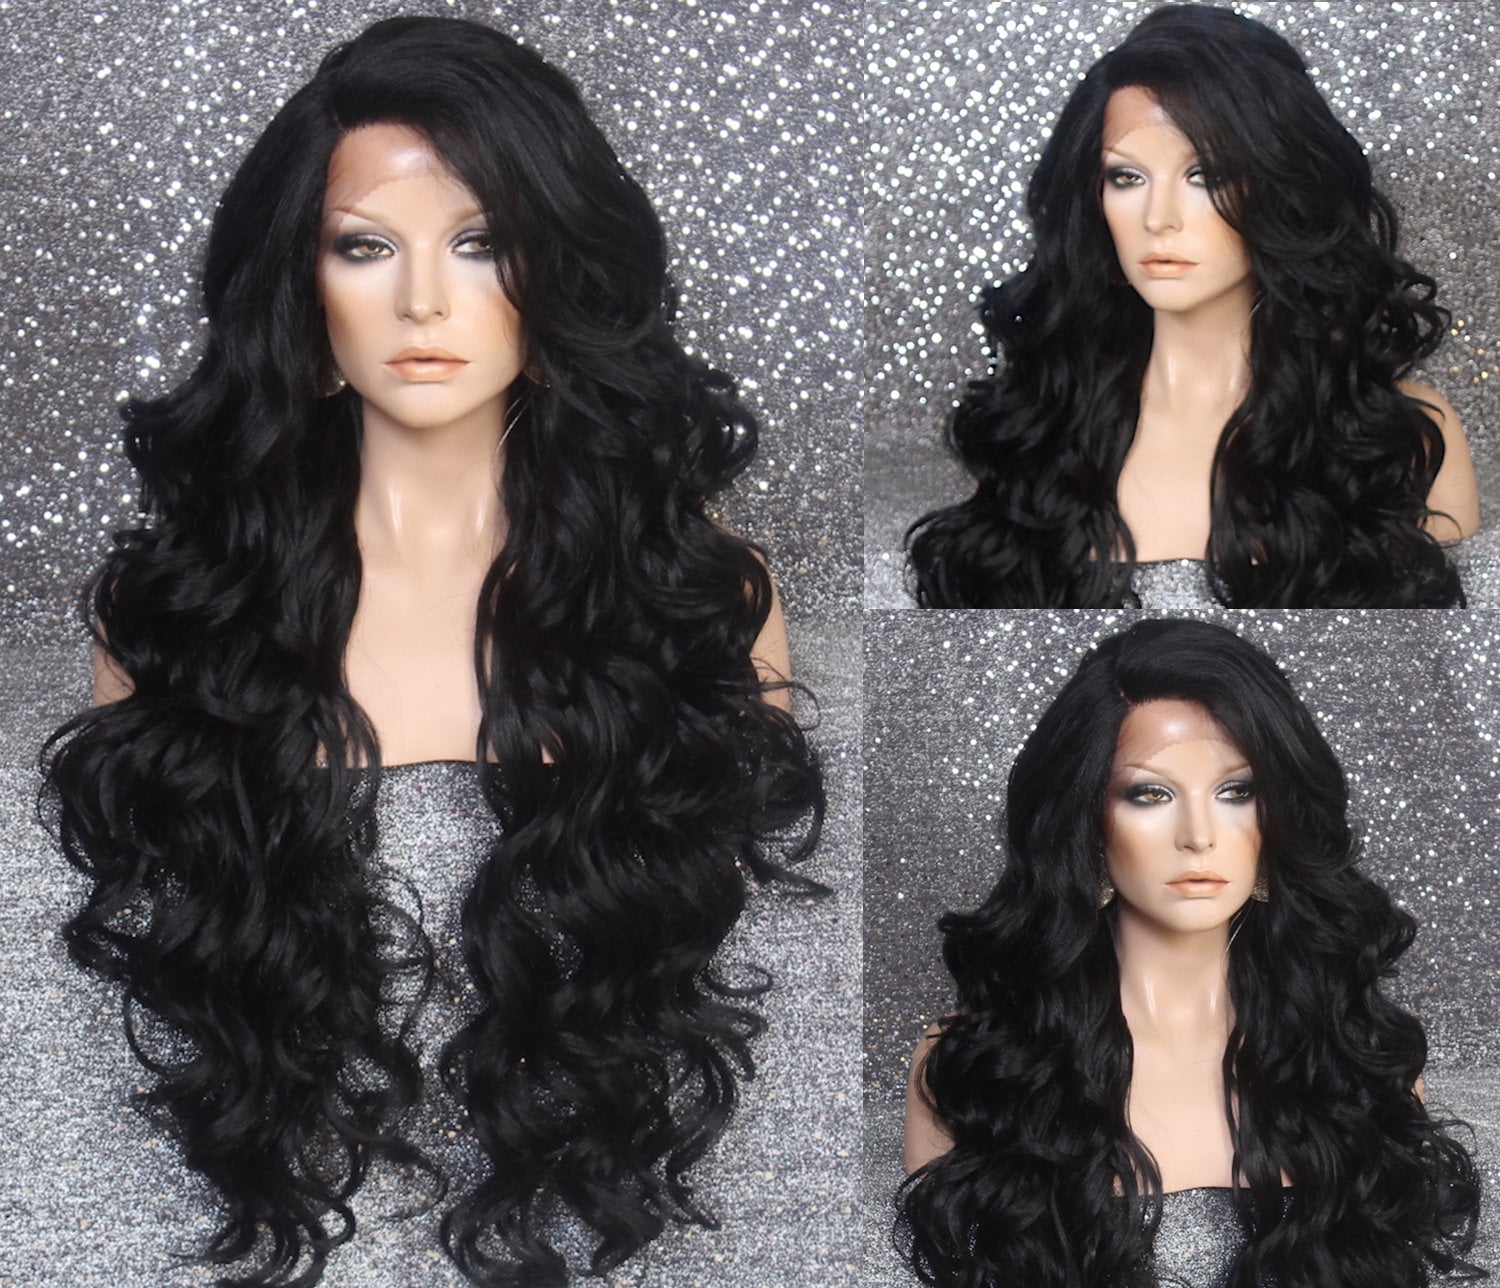 Extra Long Human Hair Blend Lace Front Wig 38 Curly Black Heat Safe Cancer/Alopecia/Theater/Cosplay/Club